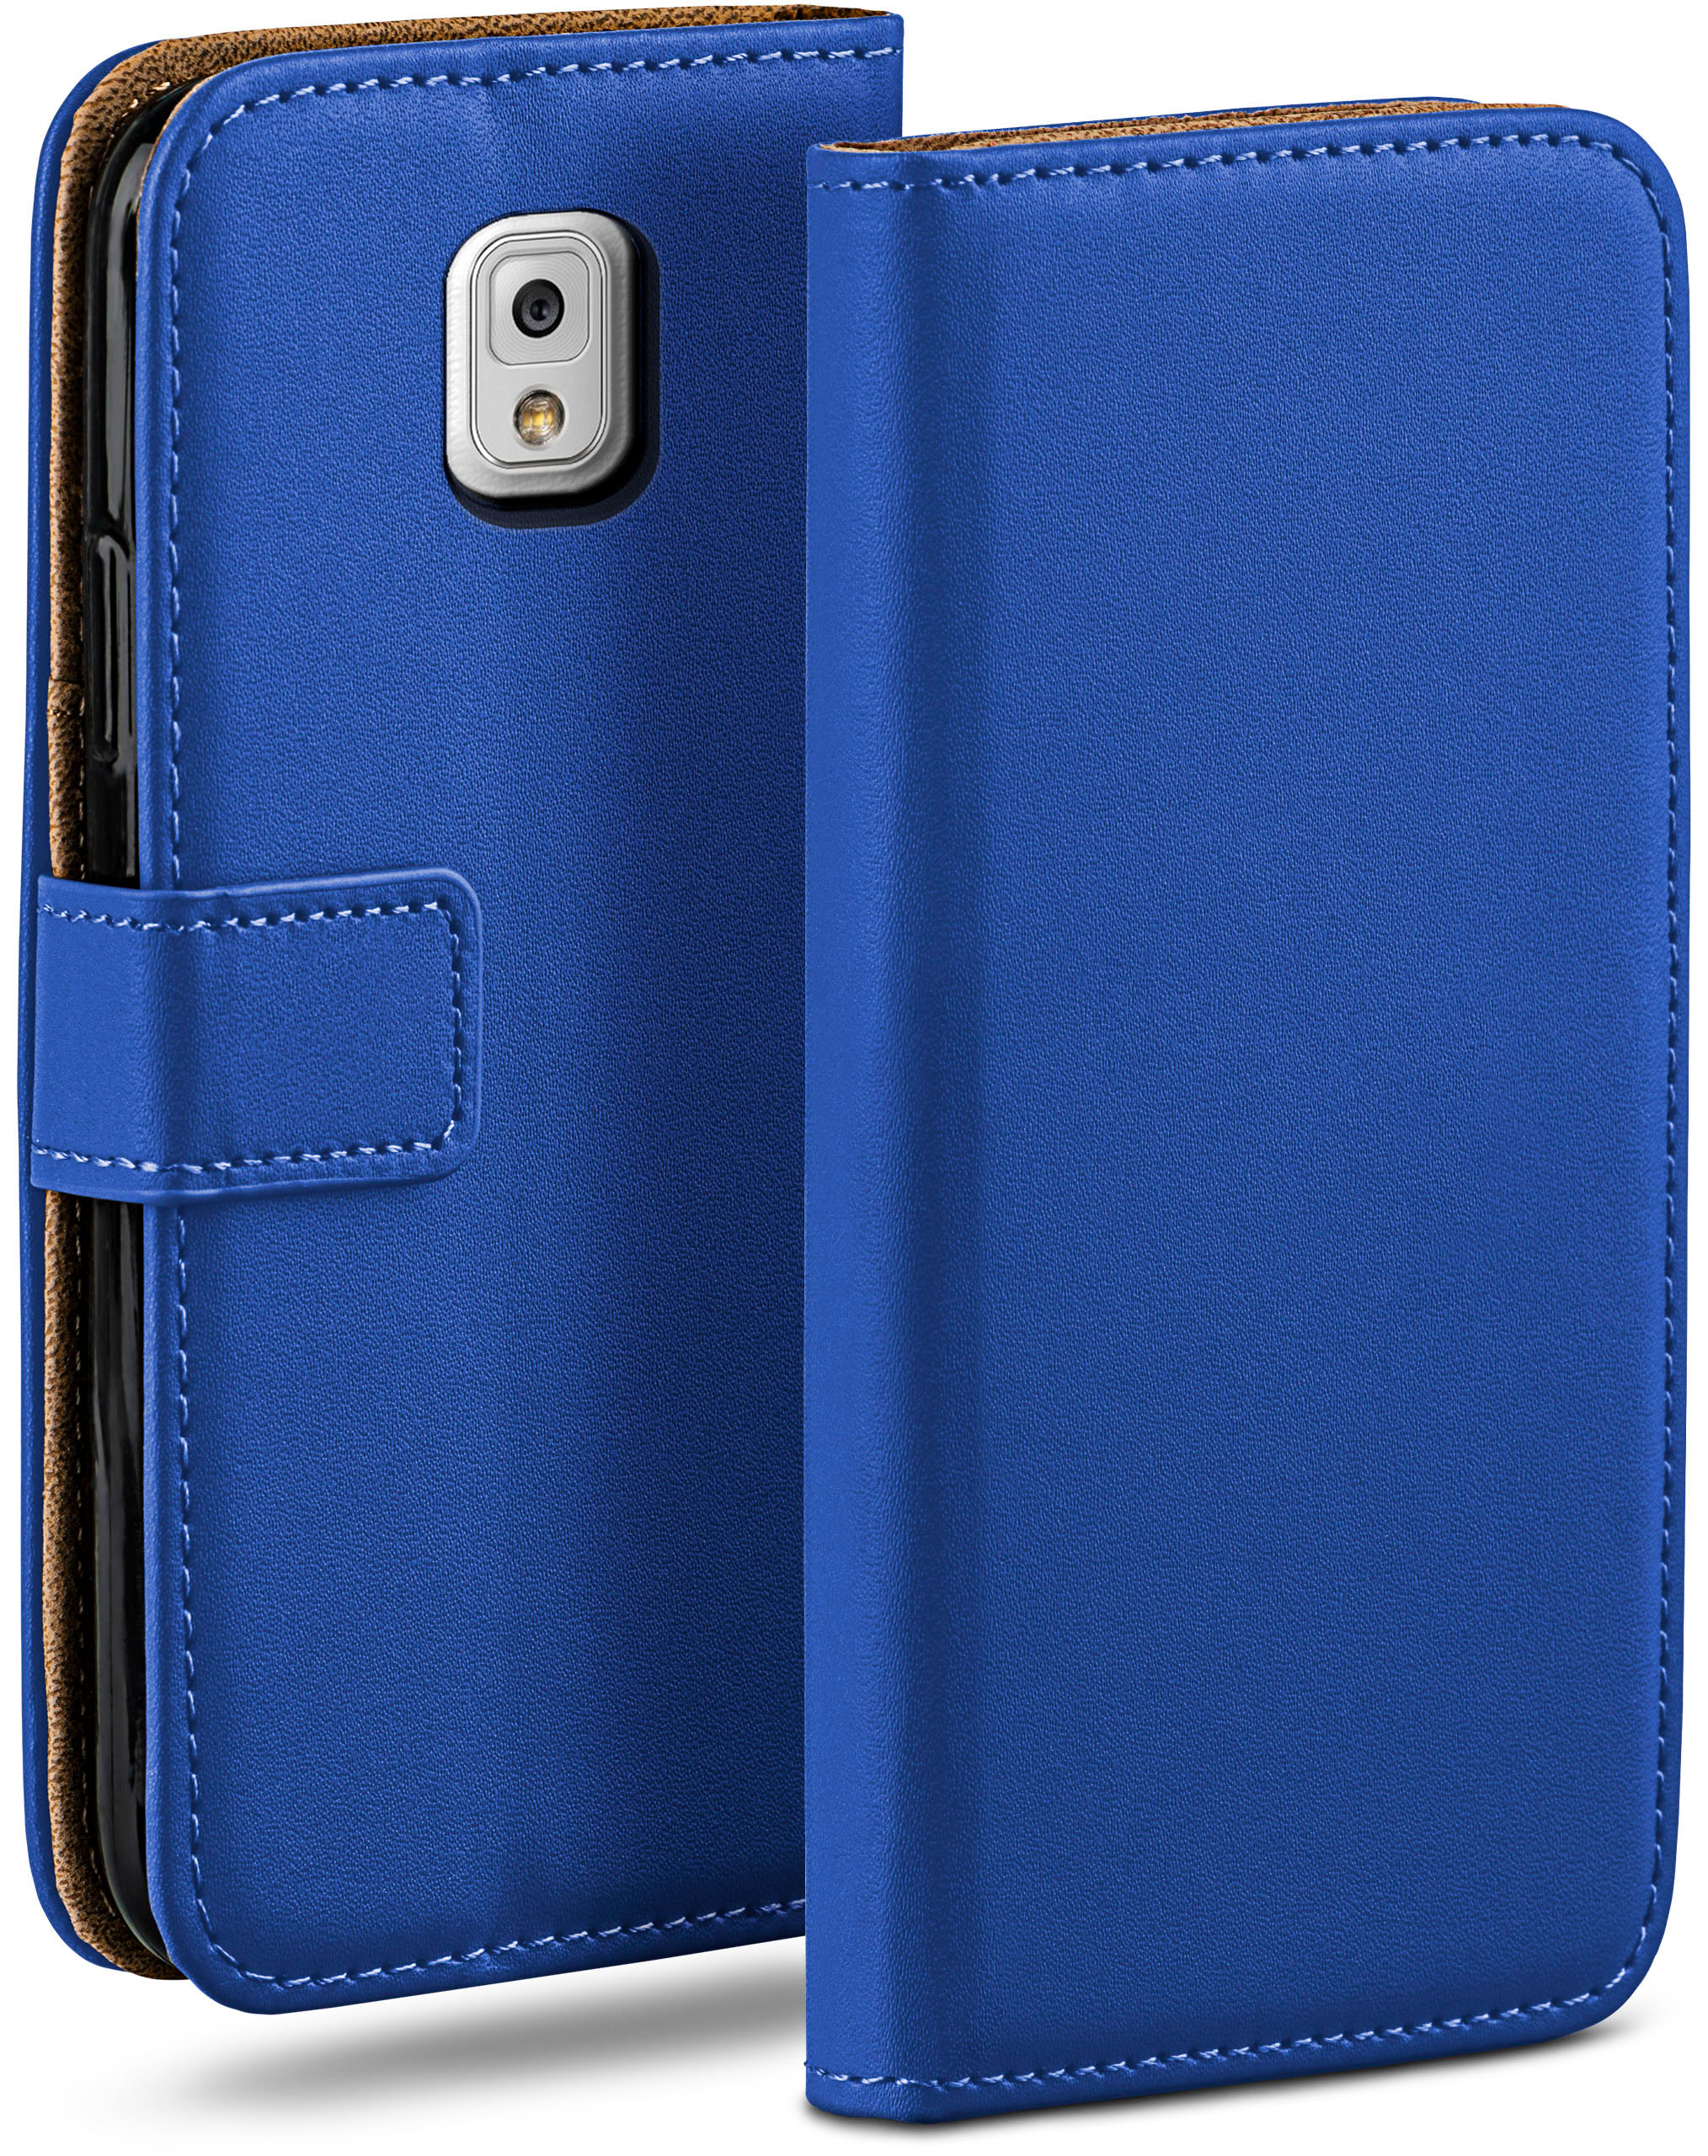 Note Case, Royal-Blue Galaxy 3, Bookcover, Book Samsung, MOEX